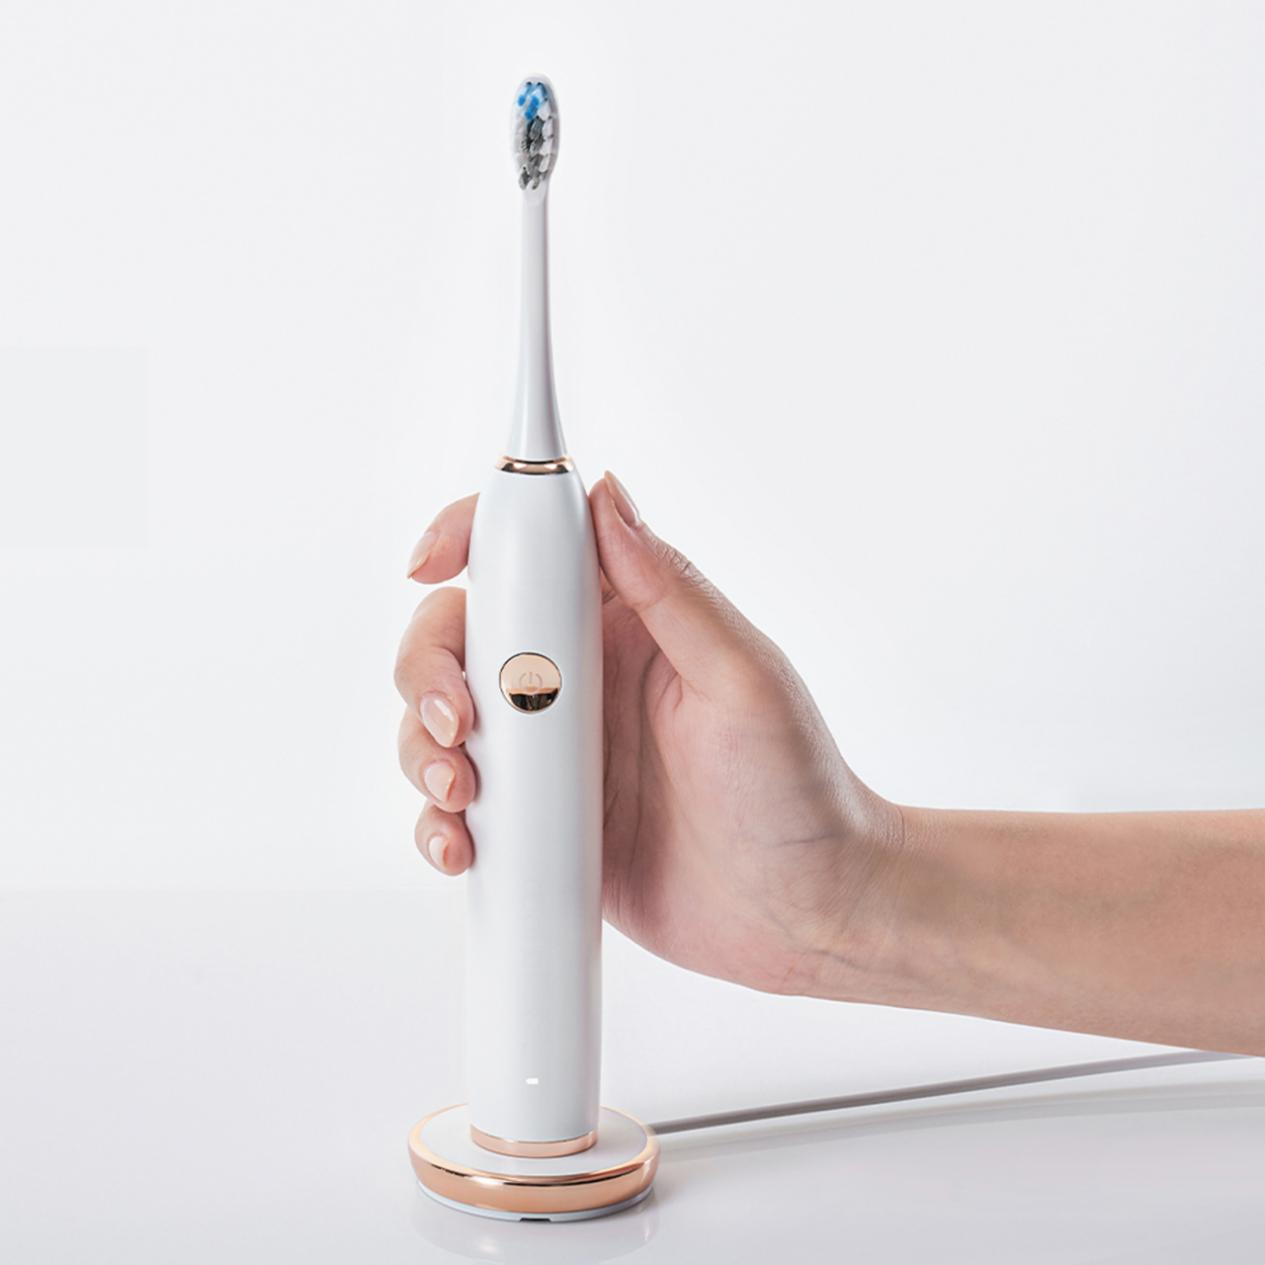 Do you need to brush for 2 minutes with electric toothbrush?